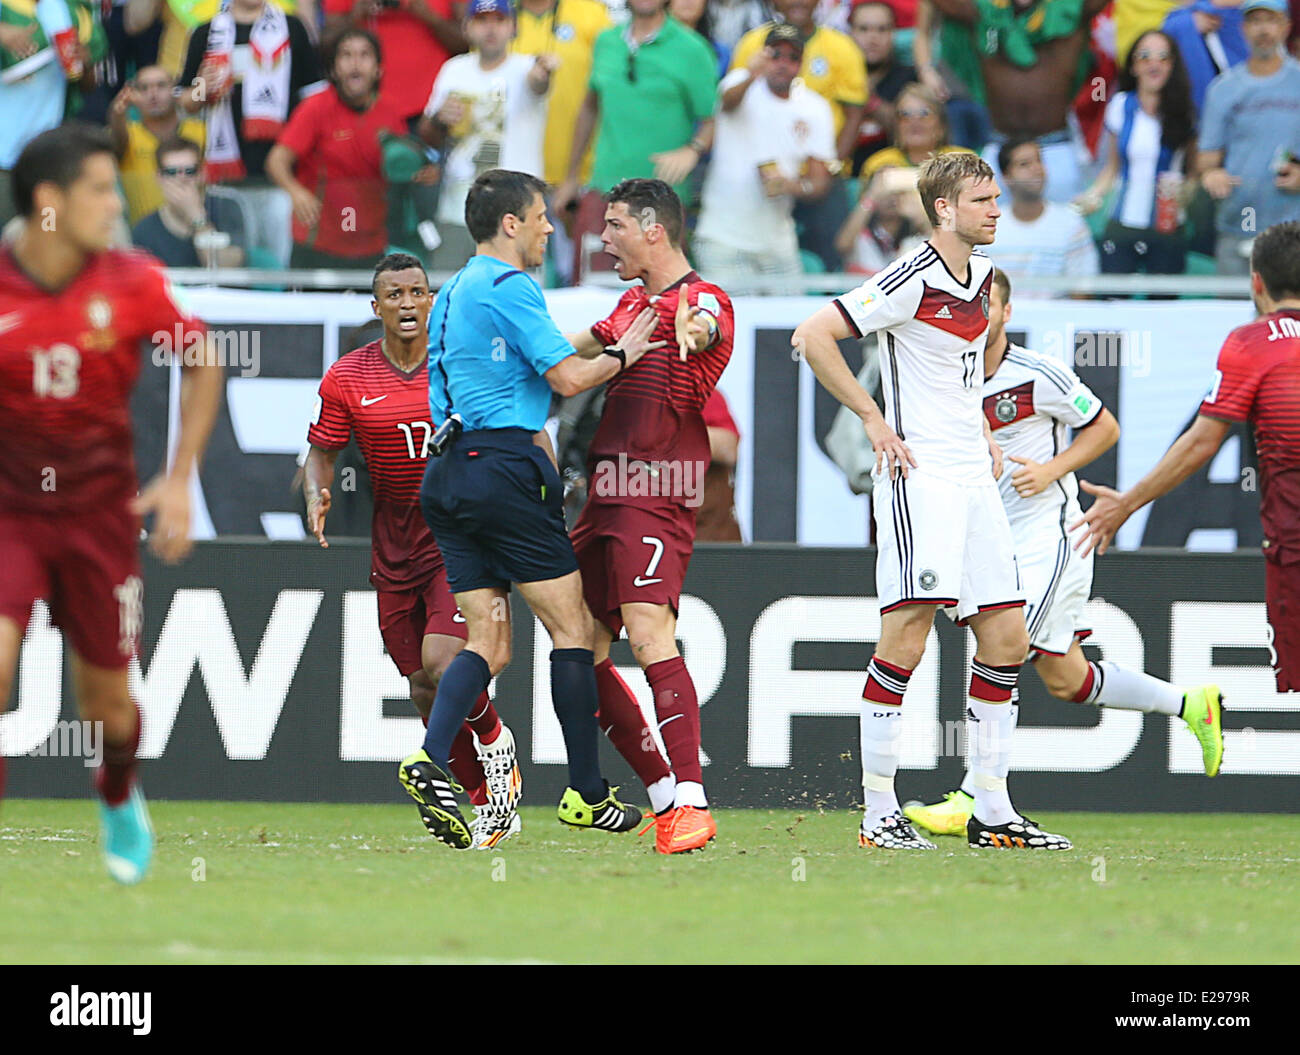 Savador, Brazil. 16th June, 2014. World Cup finals 2014. Germany versus Portugal. Cristiano Ronaldo argues the decision with referee Credit:  Action Plus Sports/Alamy Live News Stock Photo